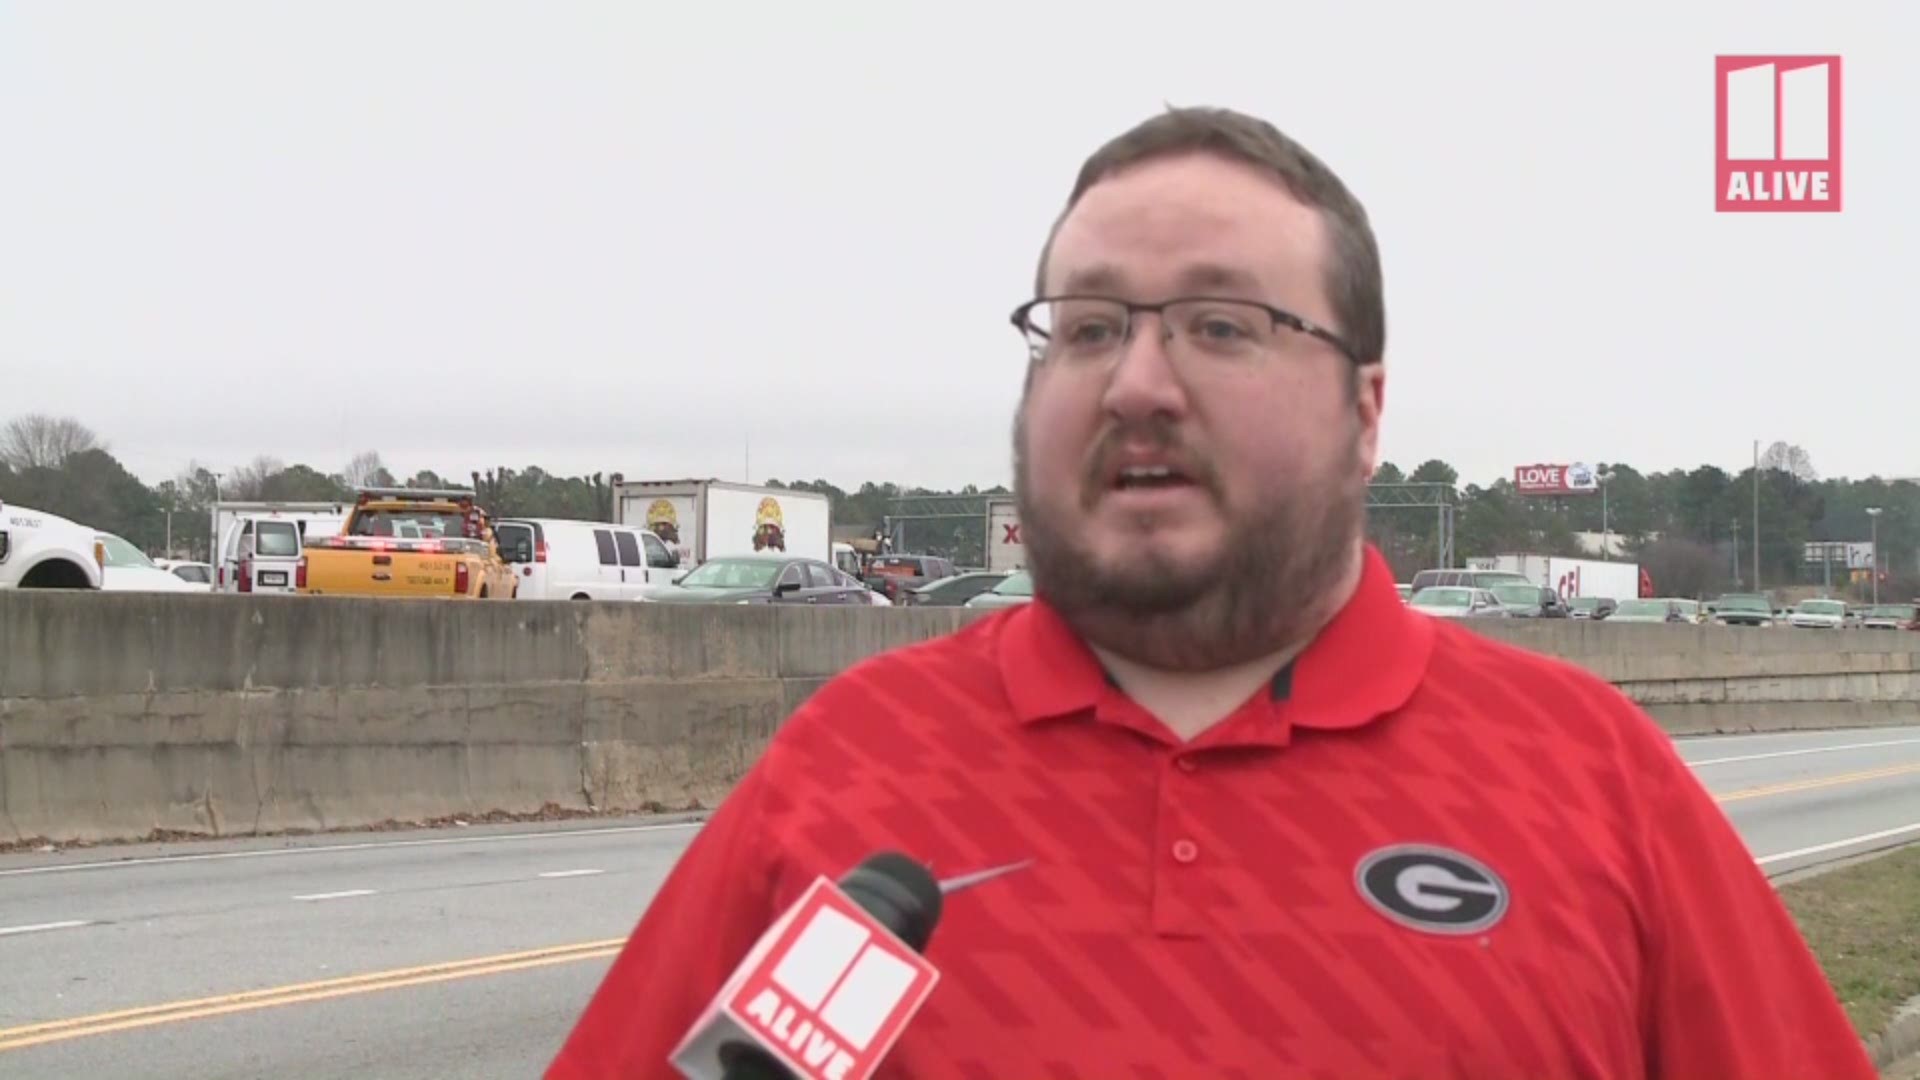 Motorist Bryan Cope describes watching Saturday morning's fiery wreck along Interstate 85 in Gwinnett County unfold directly in front of him.